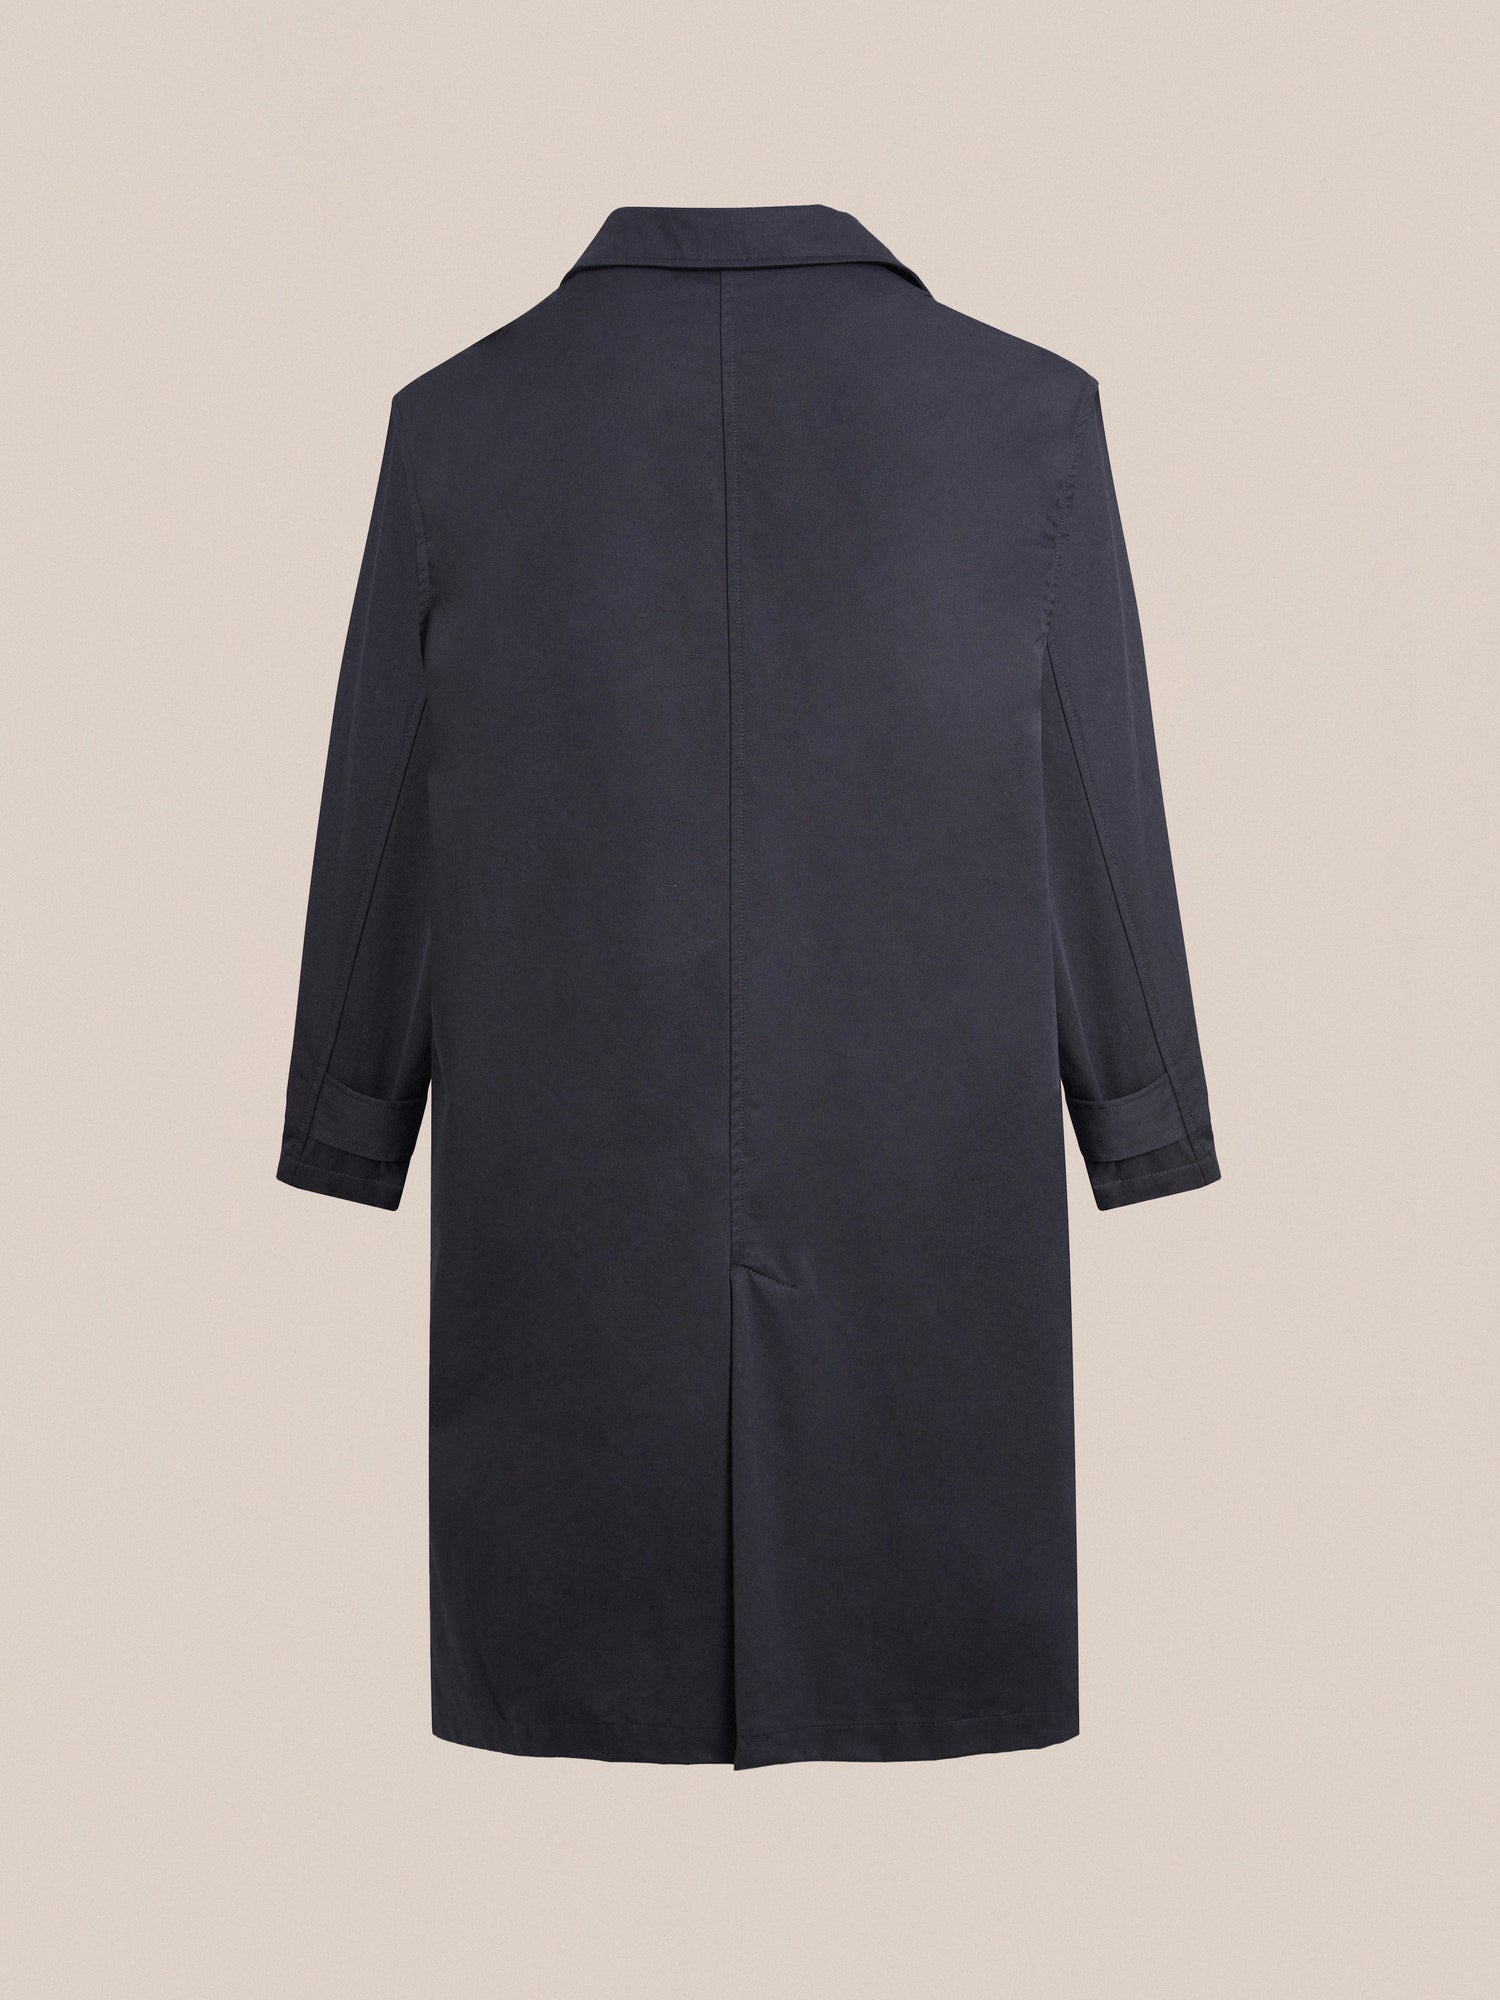 The back view of a Found Naval Trench Coat in navy, crafted from premium materials.